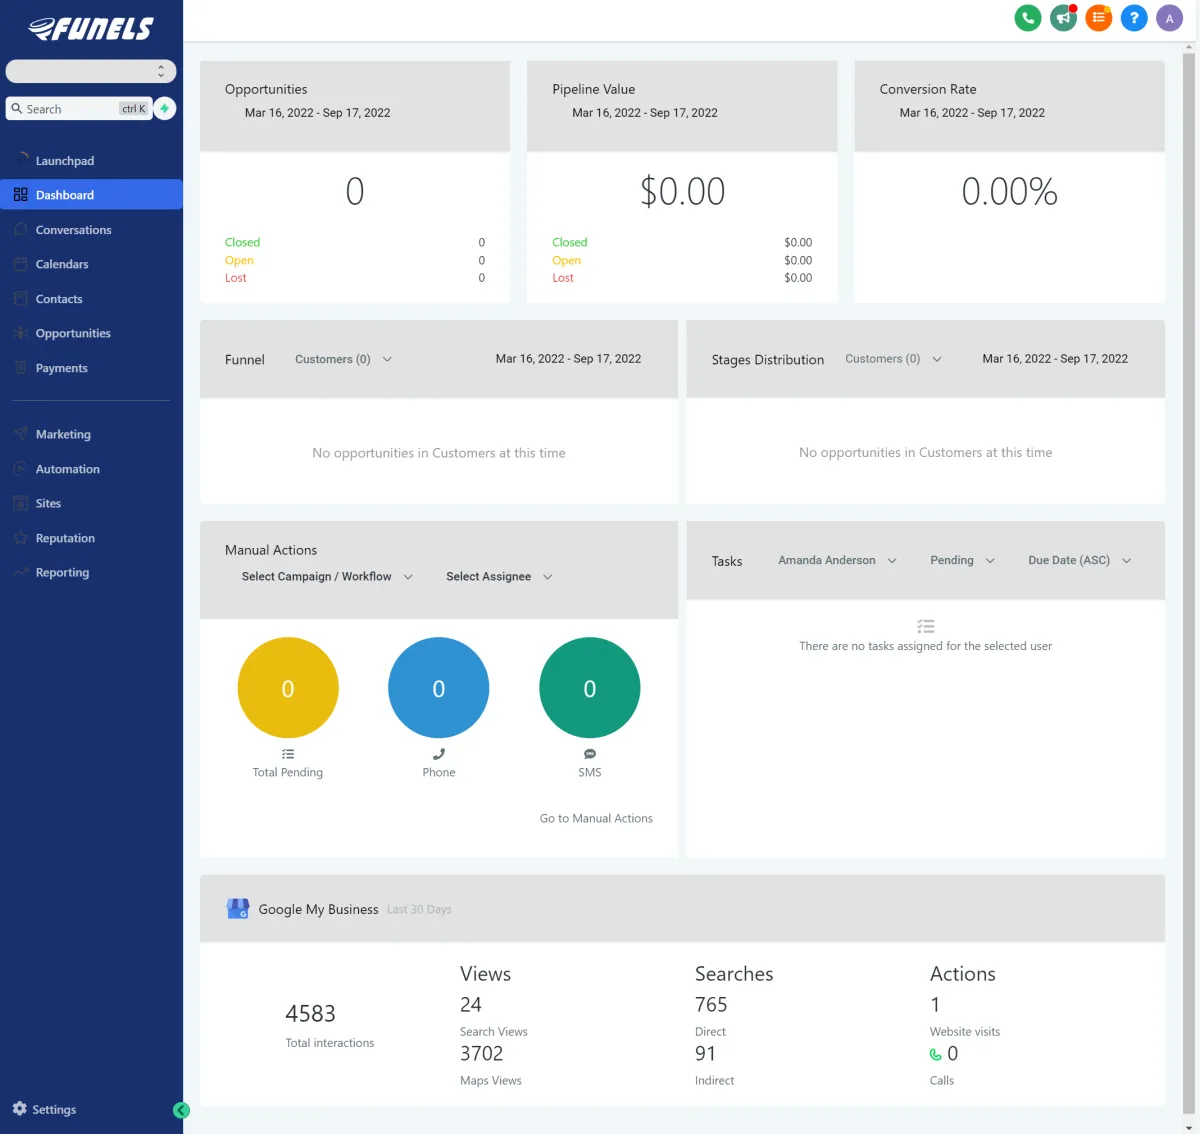 Image of the Funels dashboard. Has a blue panel along the left hand side. The background is white everywhere else. It shows the different areas of the platform like Opportunities, Conversion Rate, Sales Funnels, and Tasks.